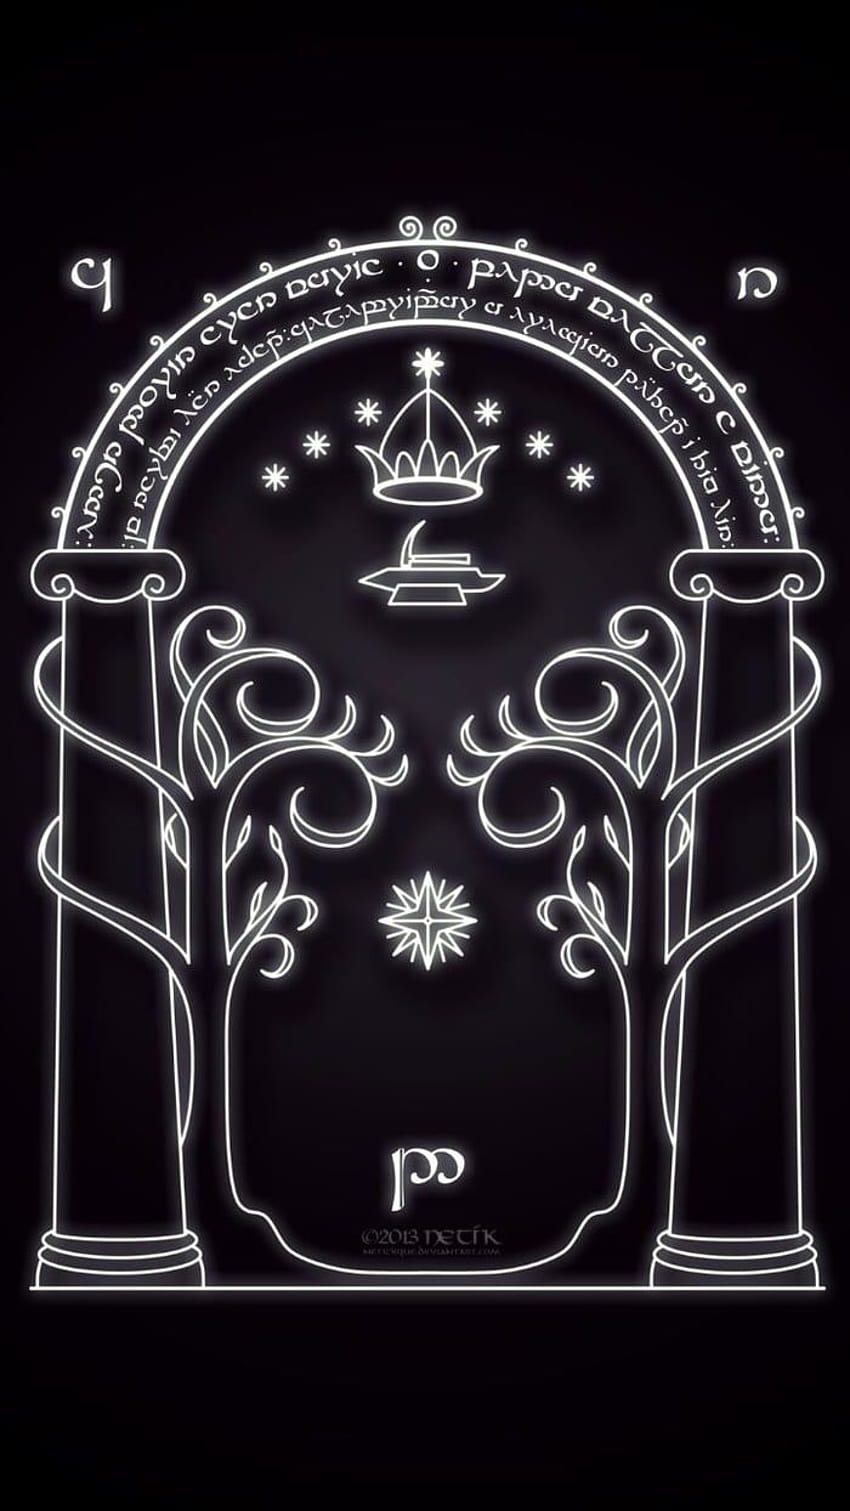 The Gates of Durin, Lord of Moria. My personal lock screen - . Lord of the rings tattoo, Lotr art, Hobbit art, Moria Gate HD phone wallpaper